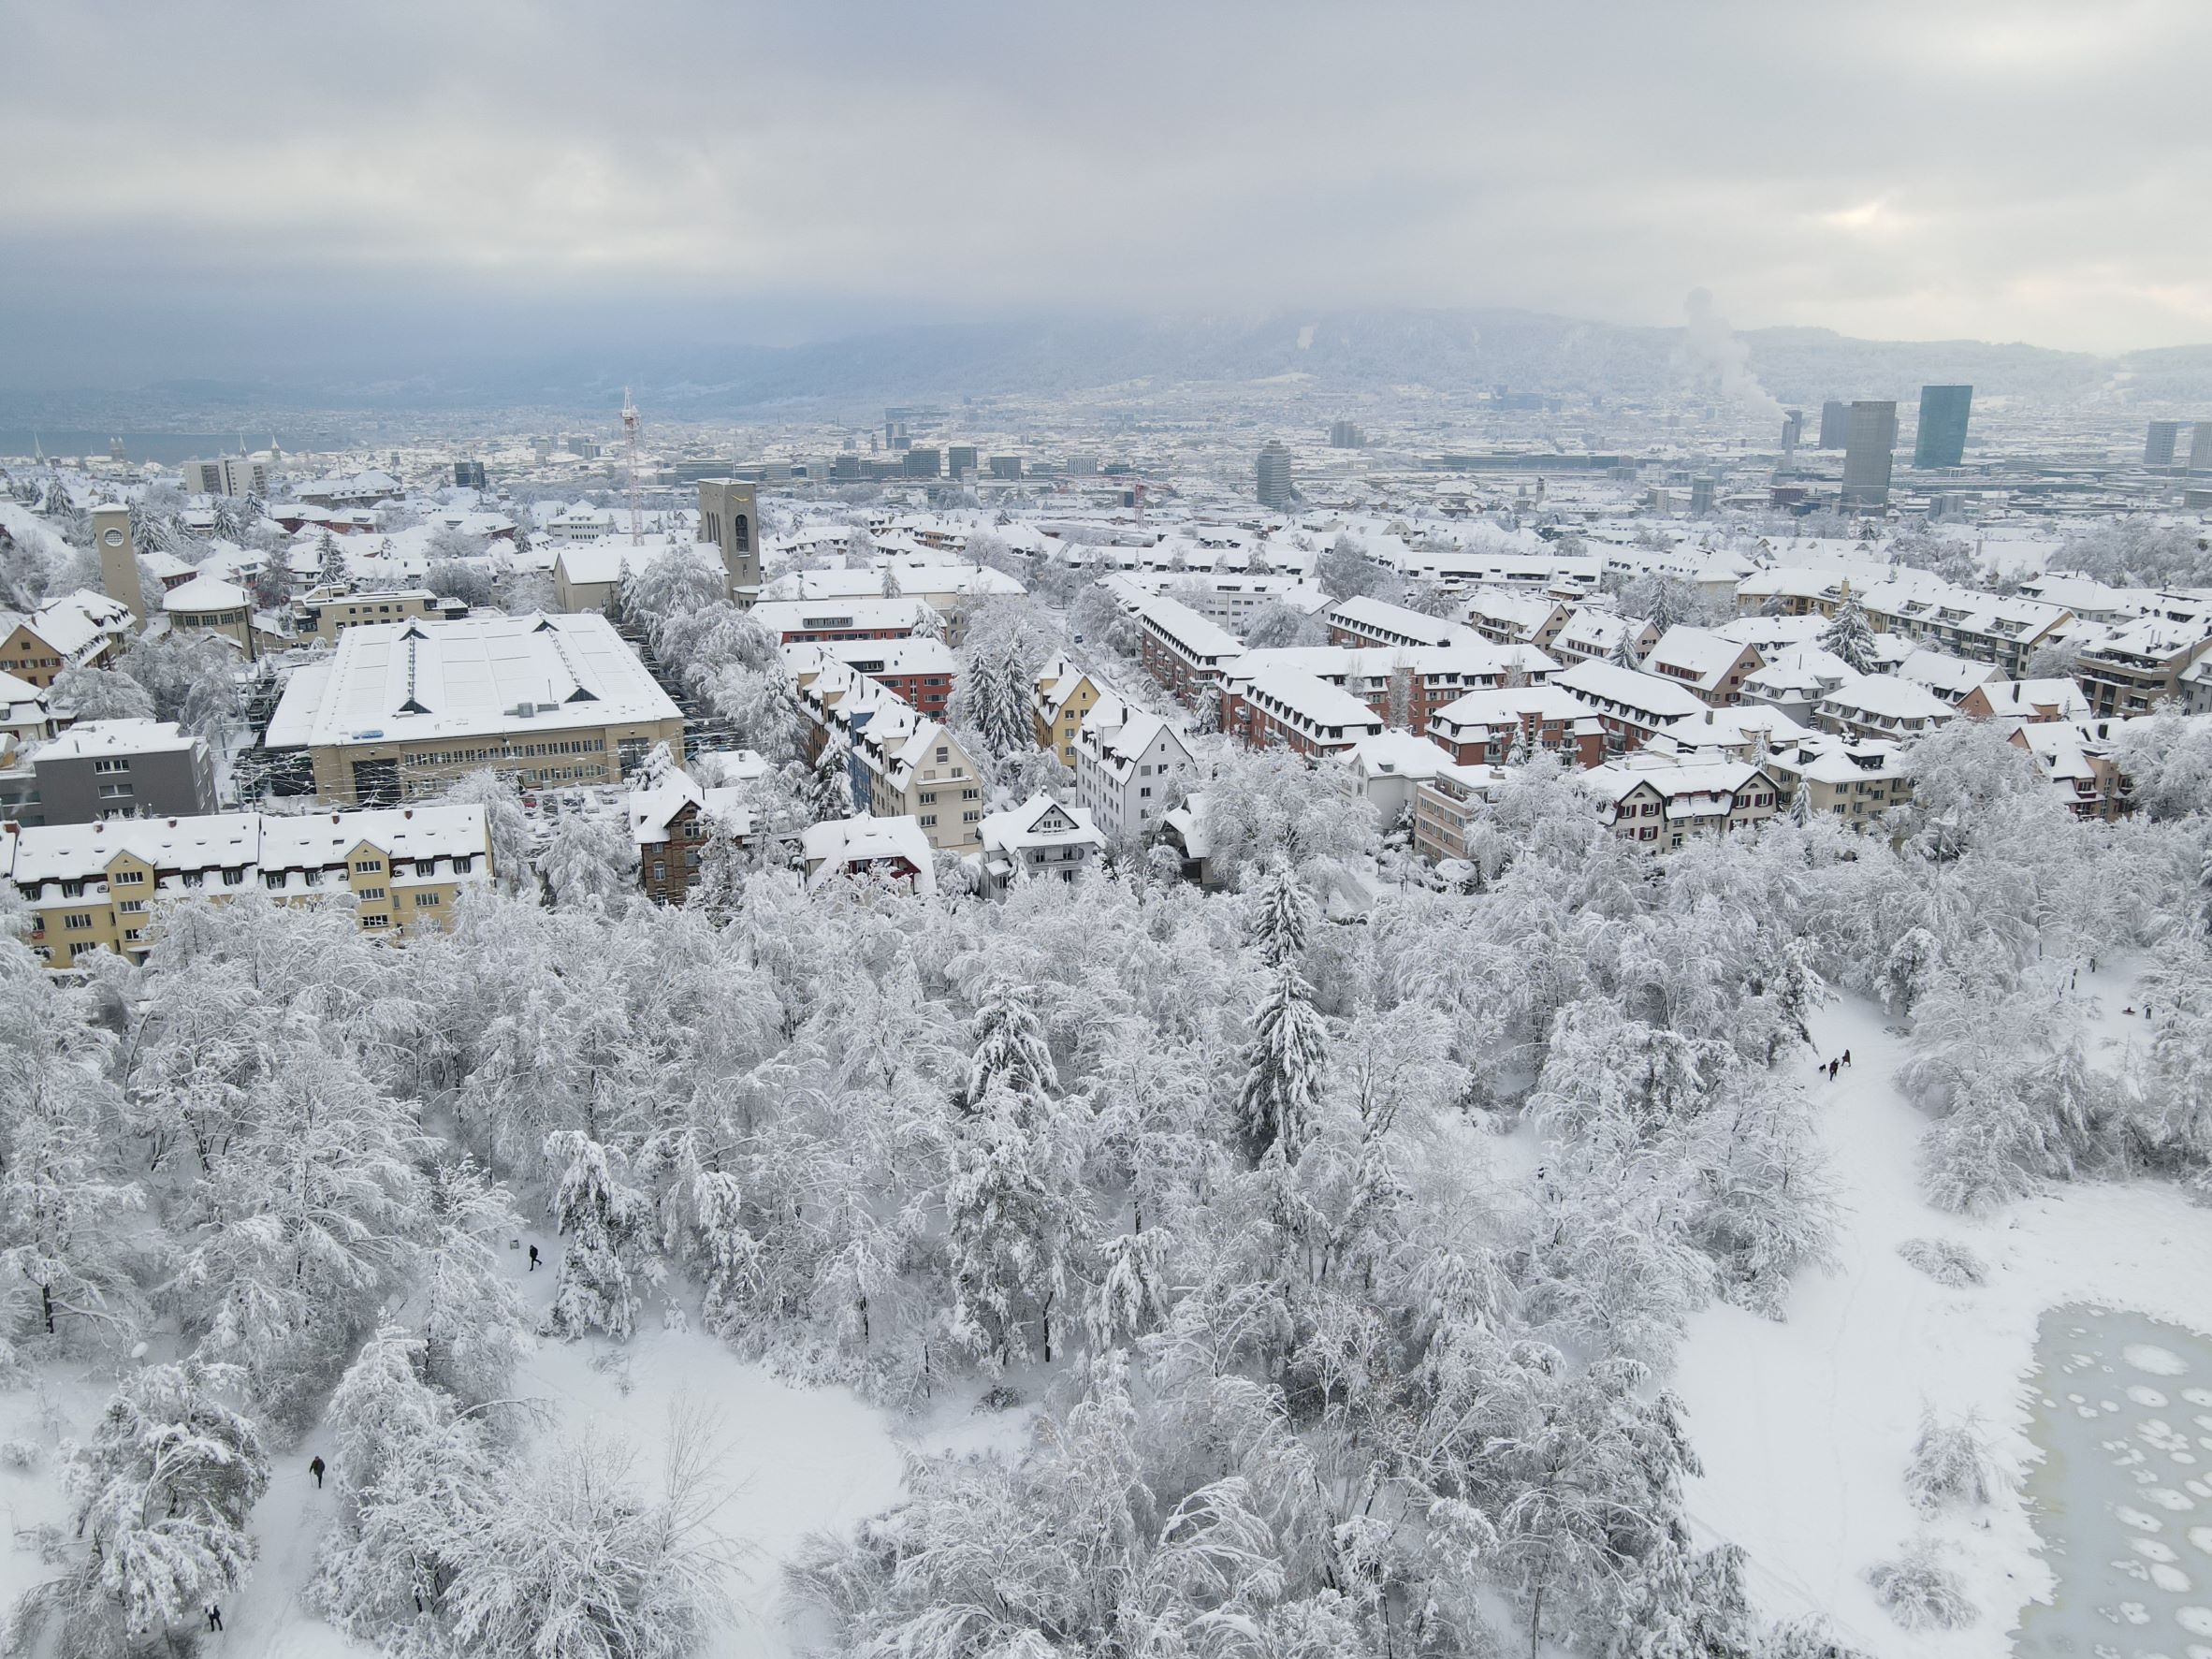 View from UZH Irchel Campus towards Zurich city and lake, a snow world like in a fairy tales. Taken by my drone, on January 15, 2021.